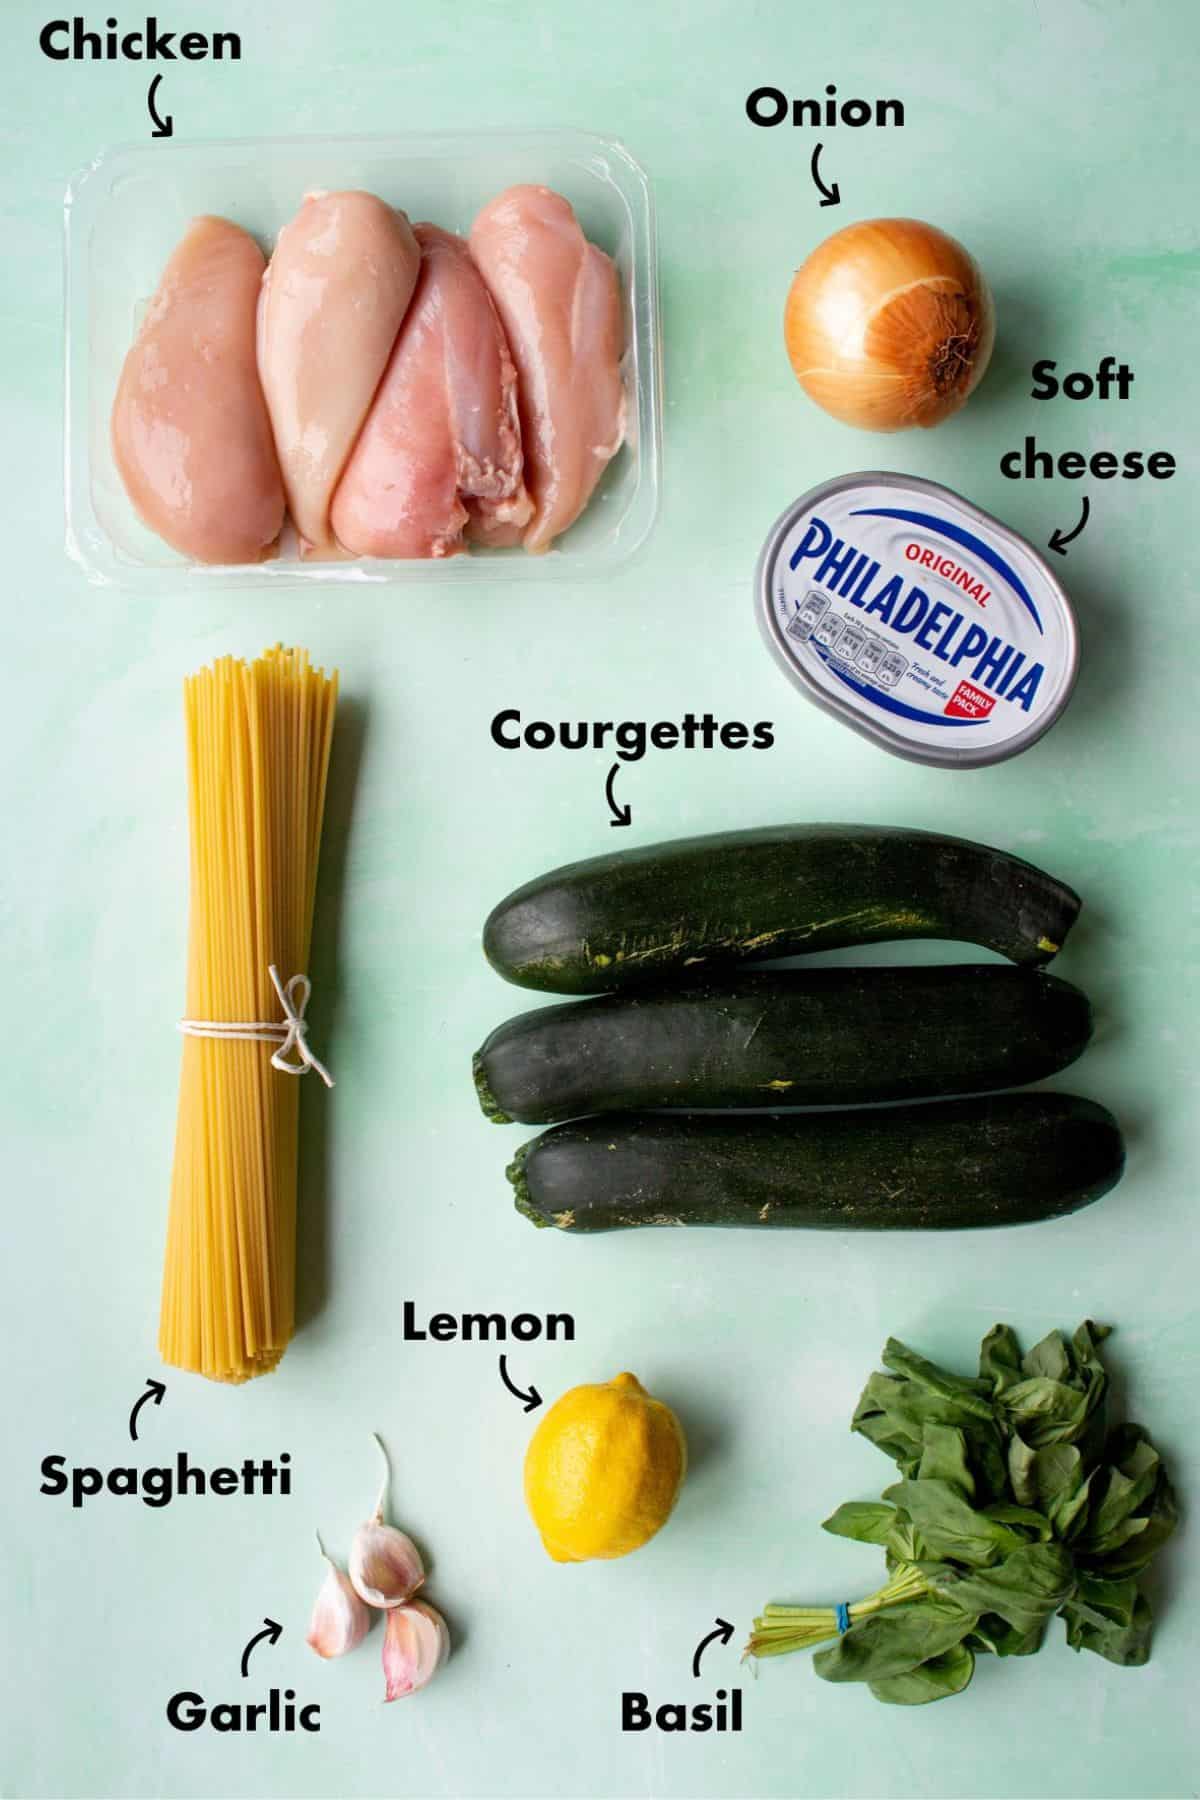 Ingredients to make Philadelphia Chicken laid out on a pale blue background and labelled.